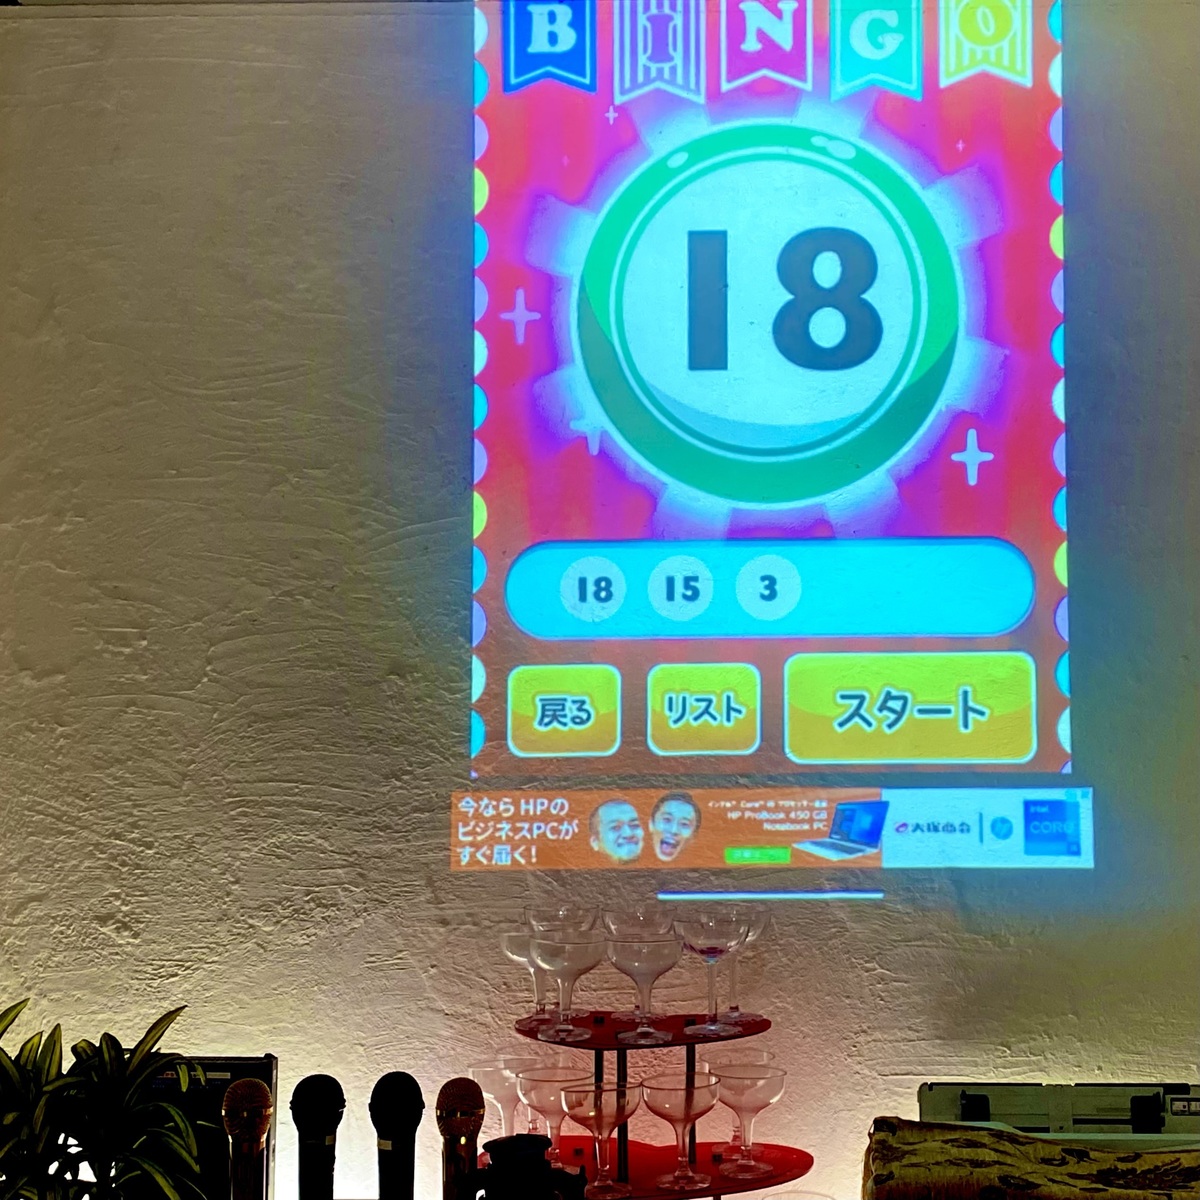 You can play bingo with a projector